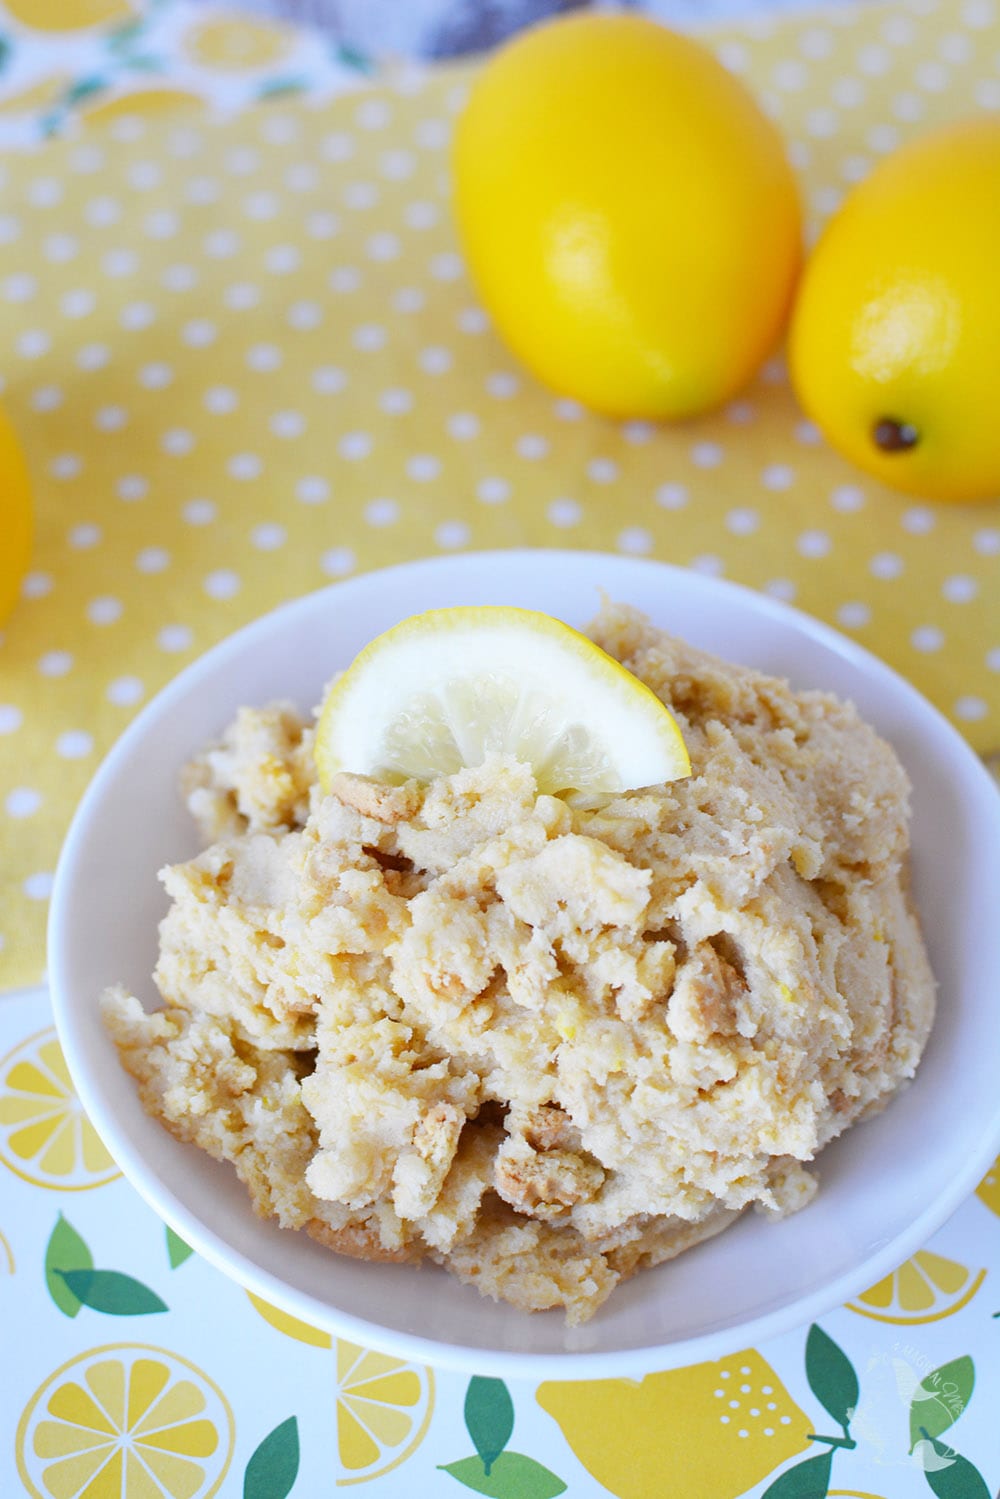 Lemon Cookie Dough to use as a dip or eat with a spoon